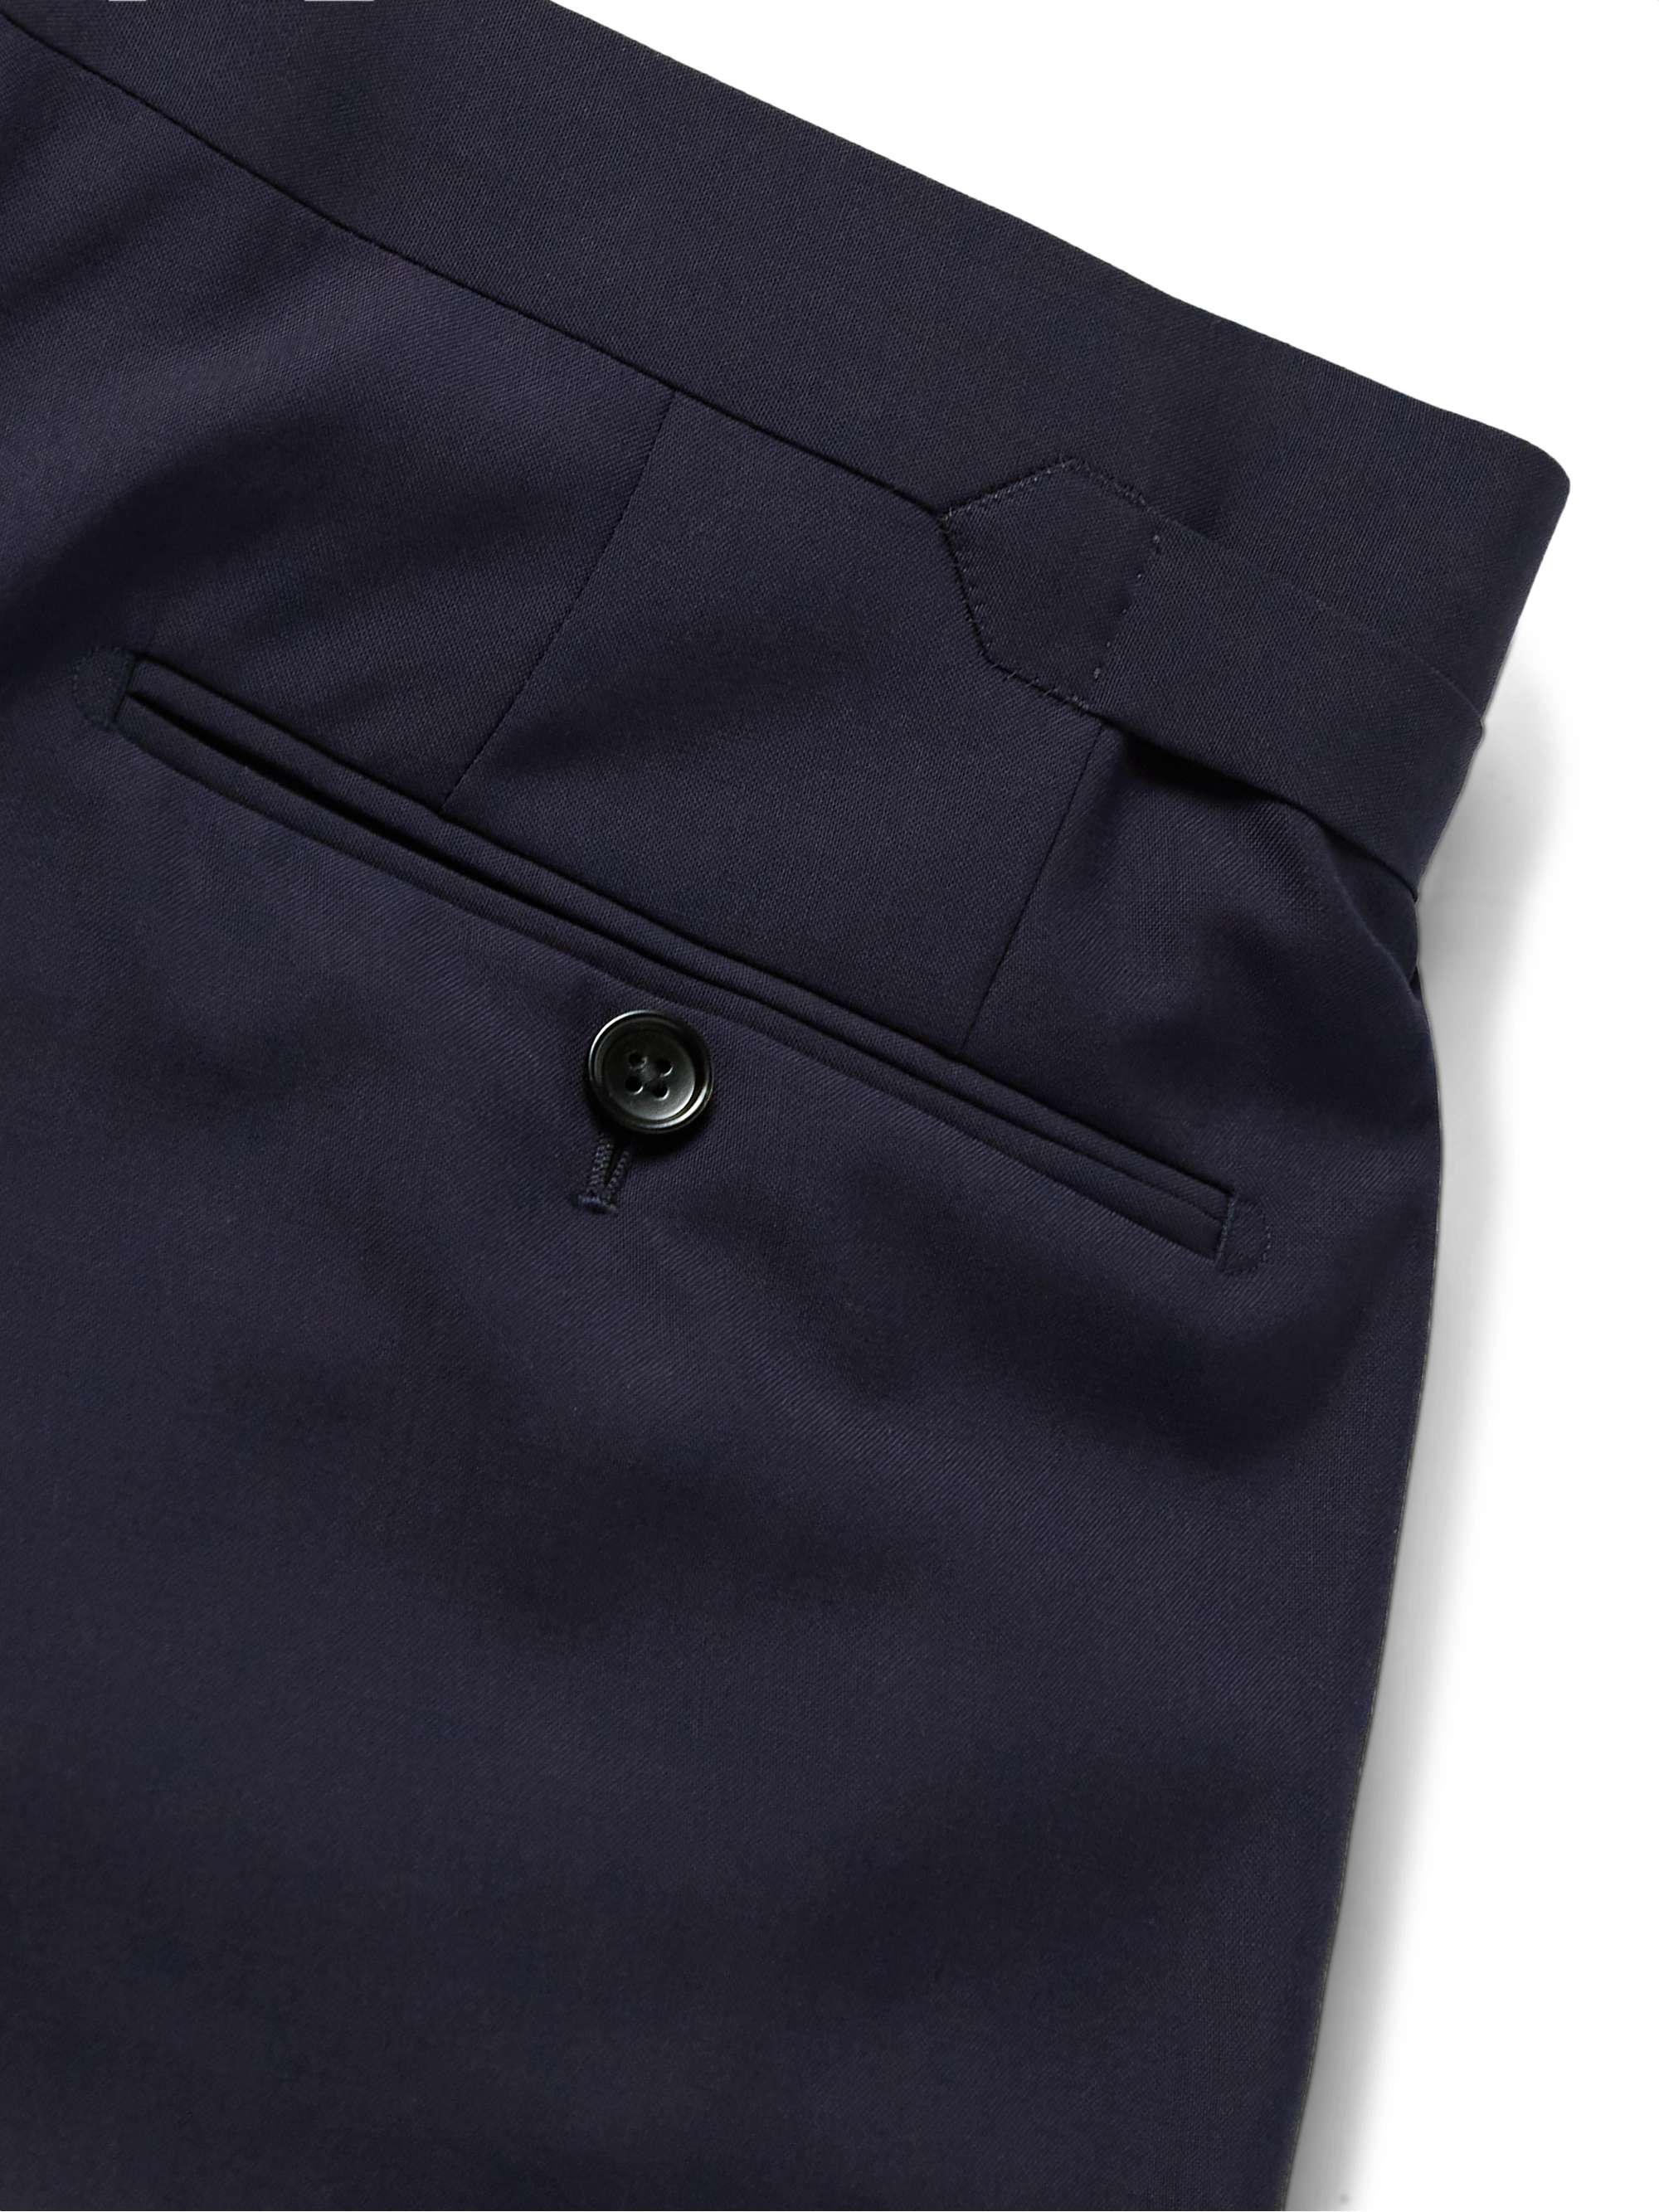 TOM FORD Slim-Fit Super 120s Wool Suit Trousers